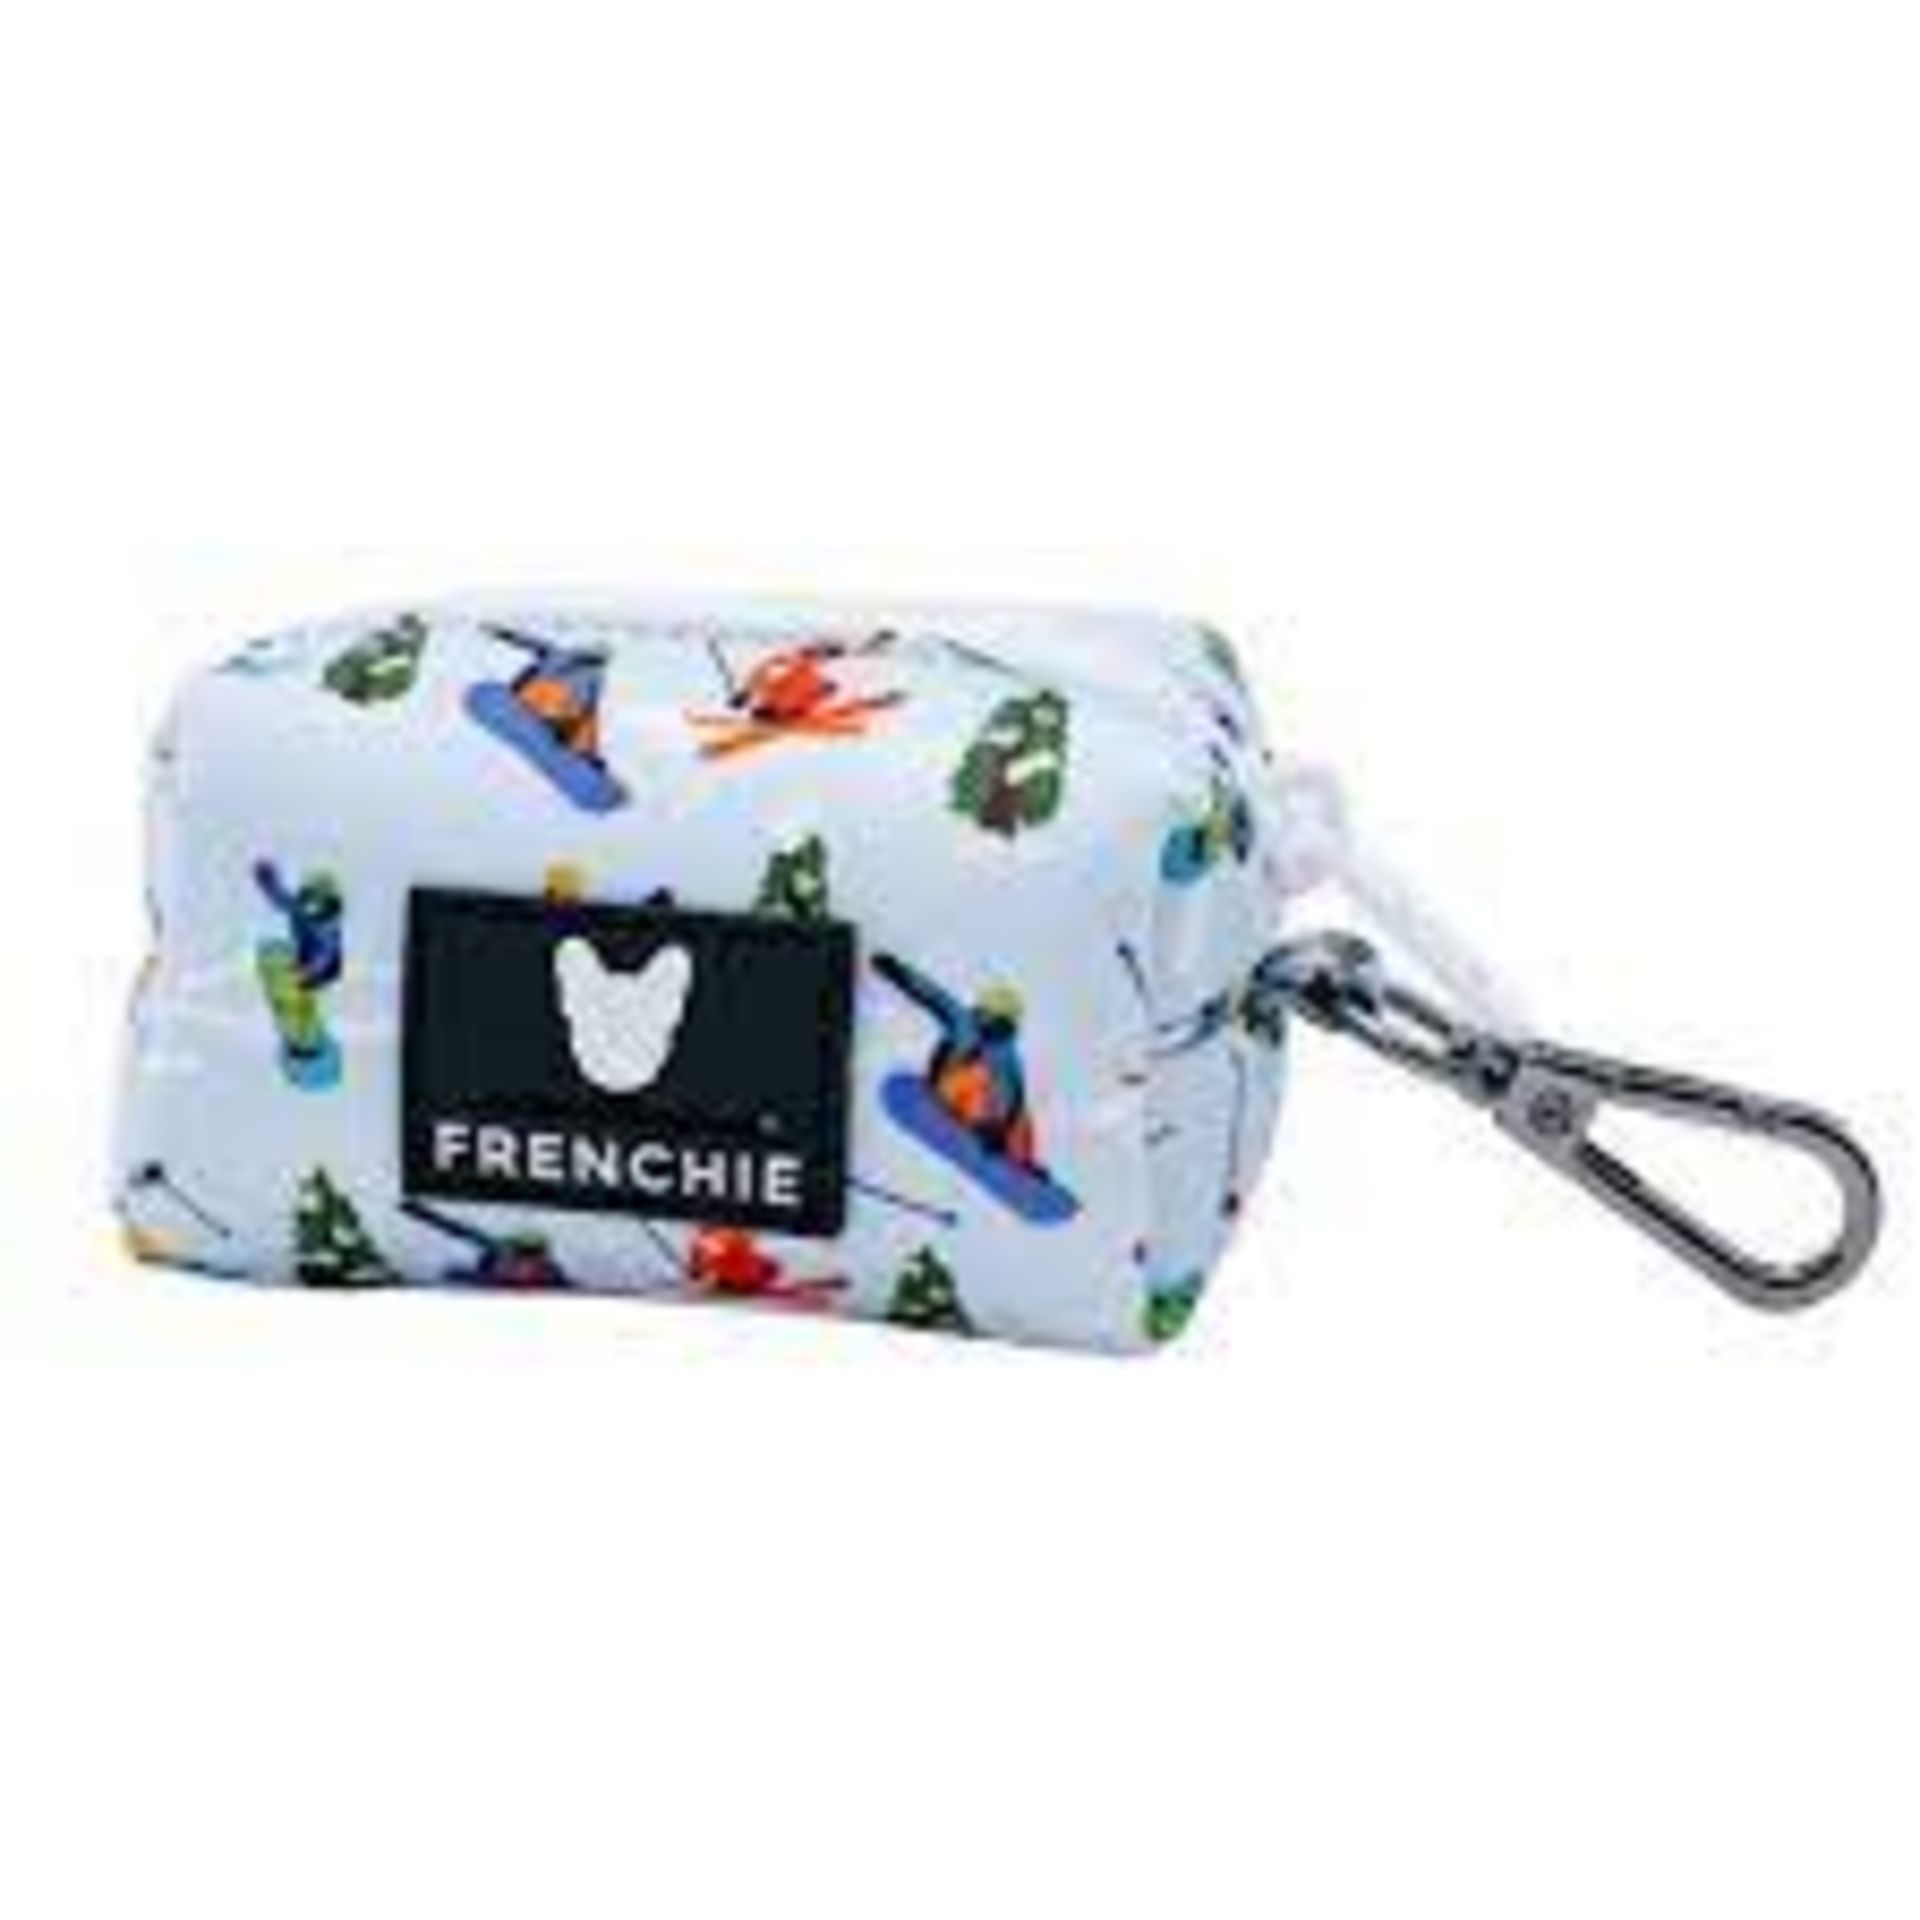 Bulk Trade Lot 1000 X New Packaged Frenchie The Bulldog Luxury Branded Dog Products. May include - Image 13 of 50